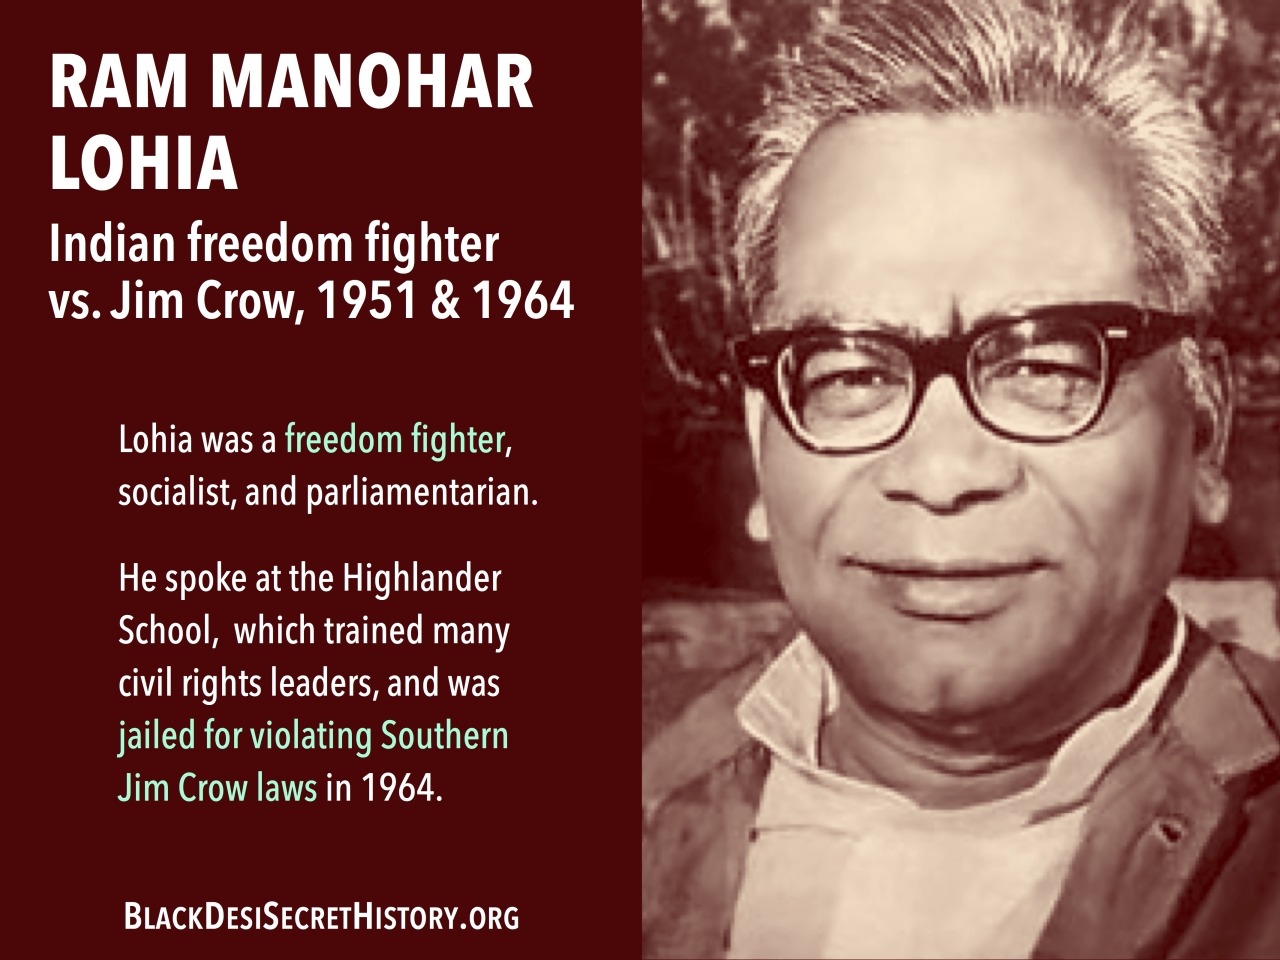 RAM MANOHAR LOHIA, Indian freedom fighter vs. Jim Crow, 1951 & 1964: Lohia was a freedom fighter, socialist, and parliamentarian. He spoke at the Highlander School,  which trained many civil rights leaders, and was jailed for violating Southern Jim Crow laws in 1964.